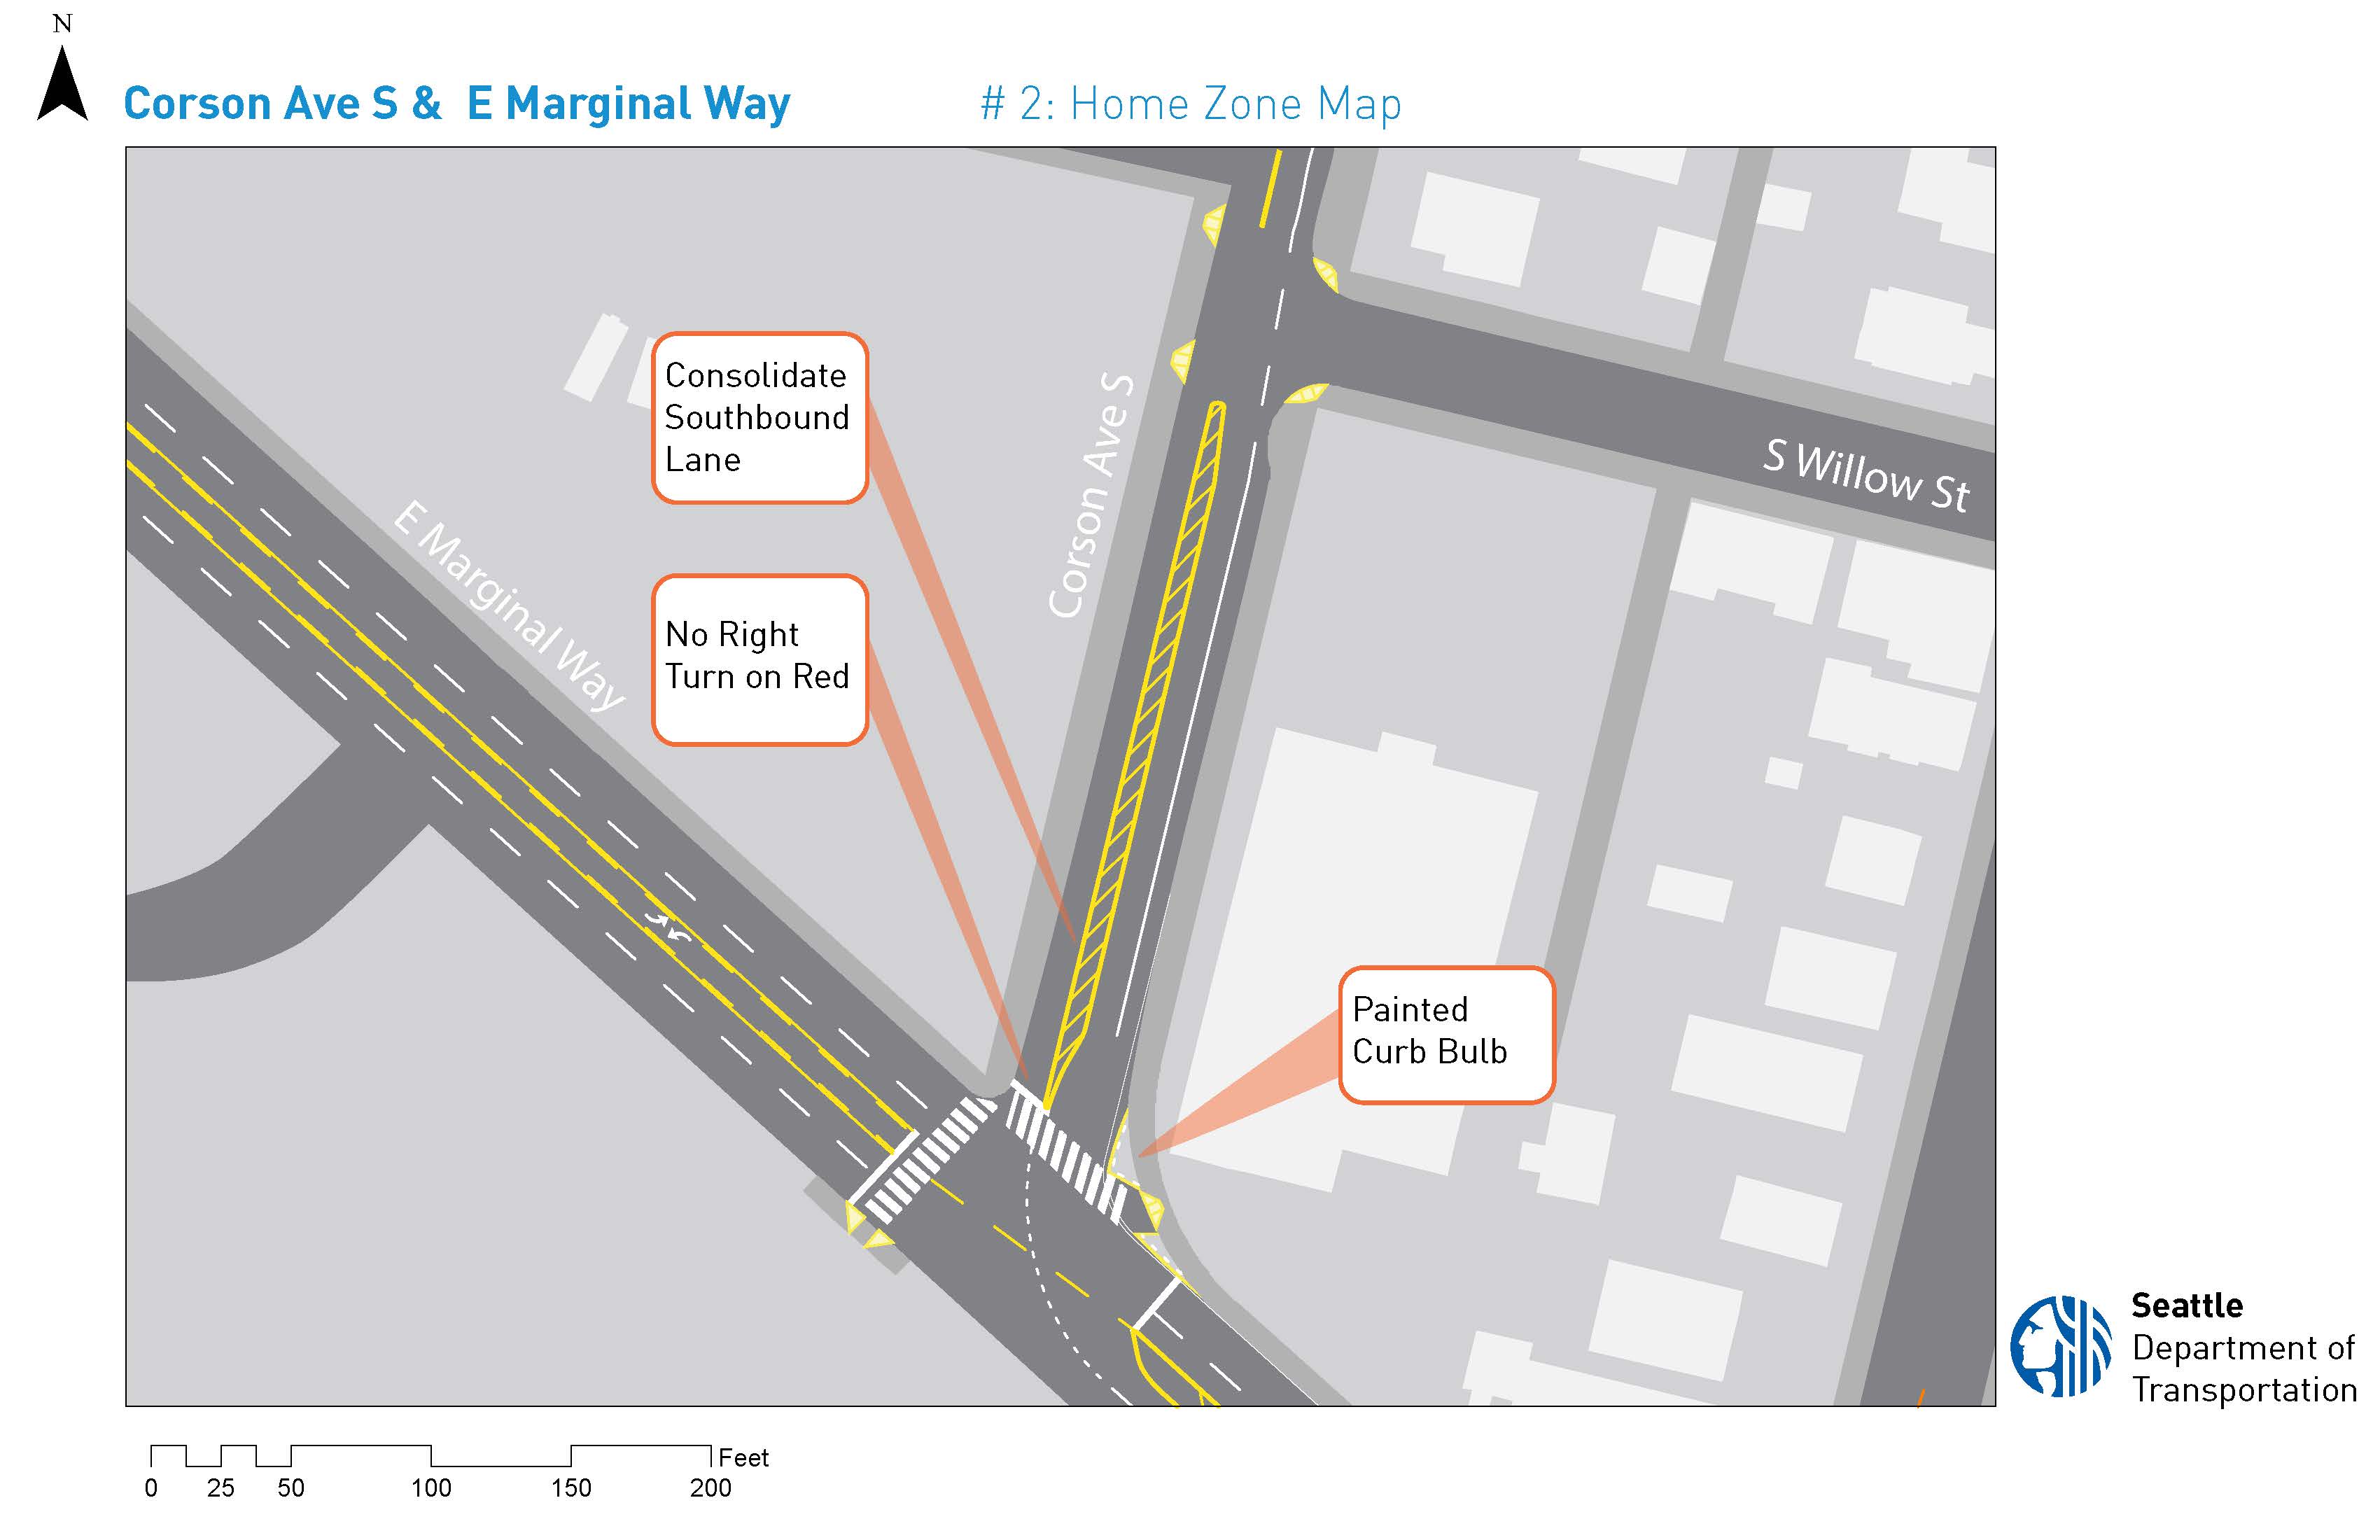 Map of Corson Ave S and E Marginal Way Home Zone